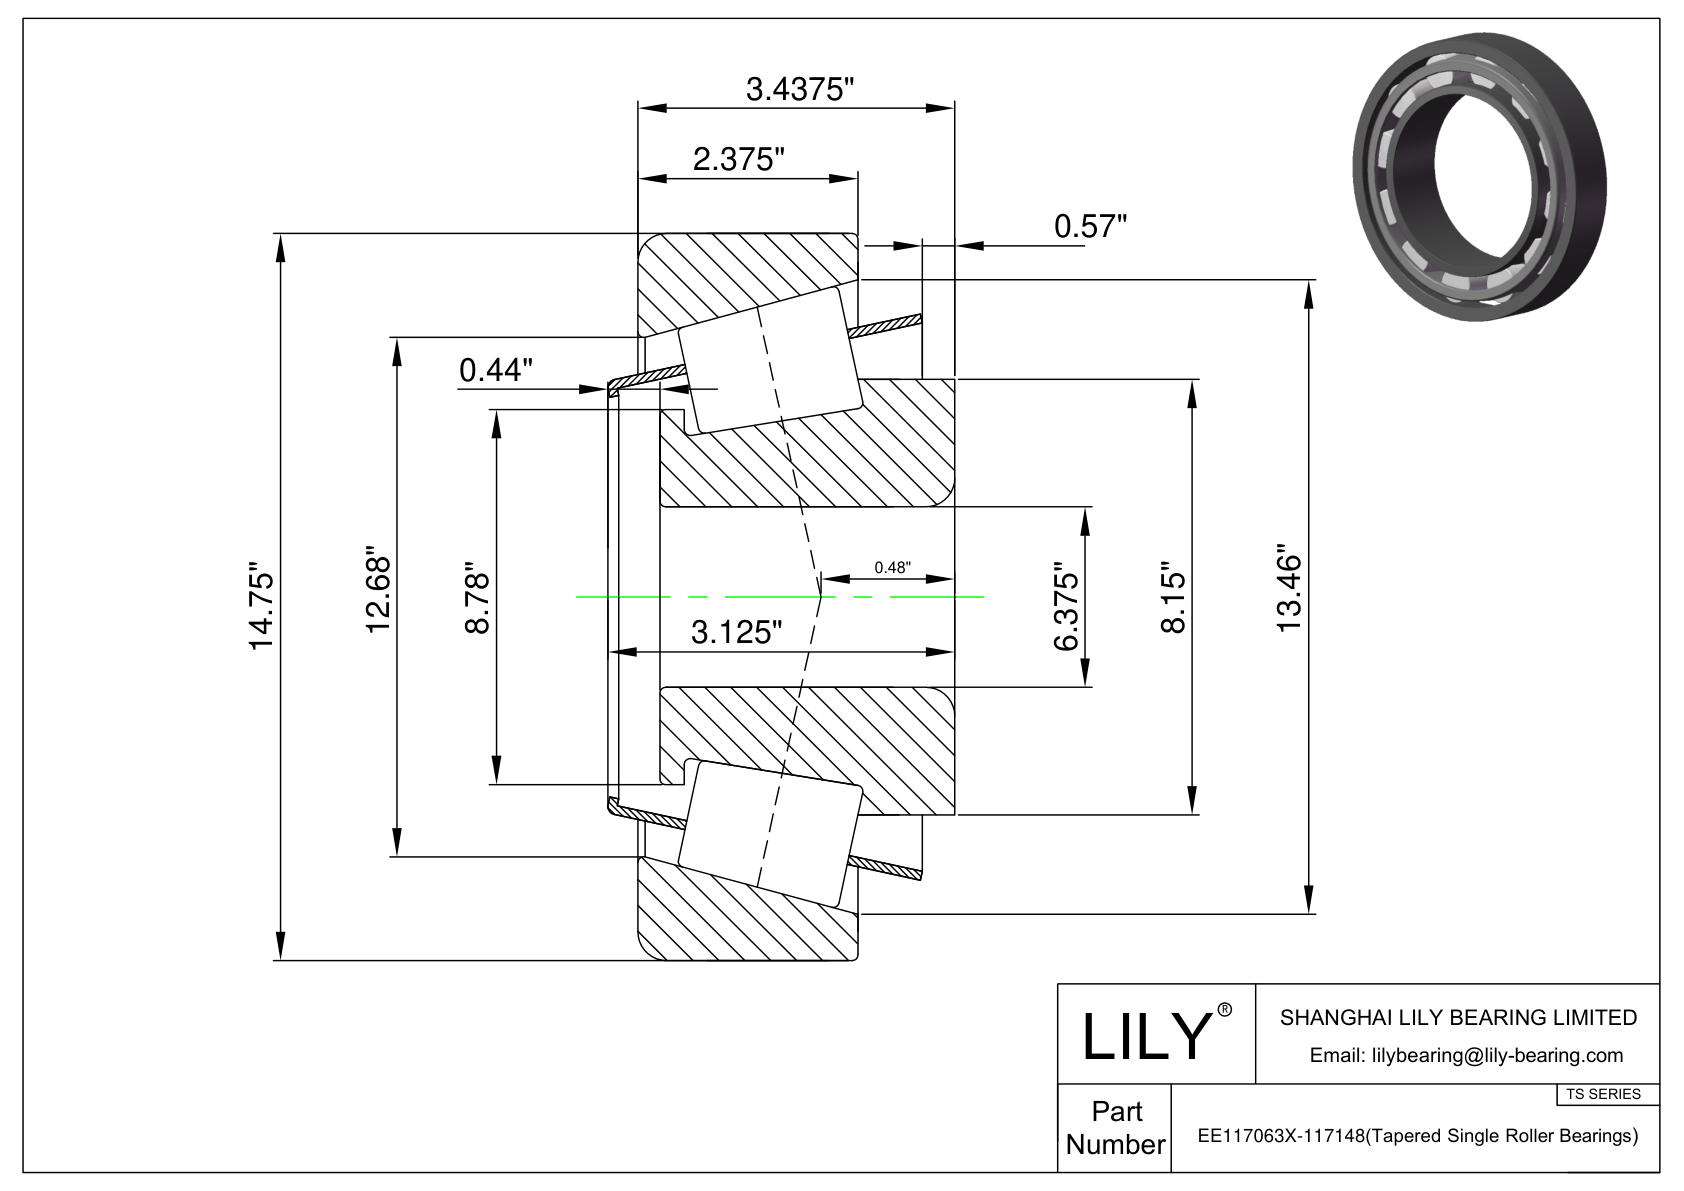 EE117063X-117148 TS (Tapered Single Roller Bearings) (Imperial) cad drawing